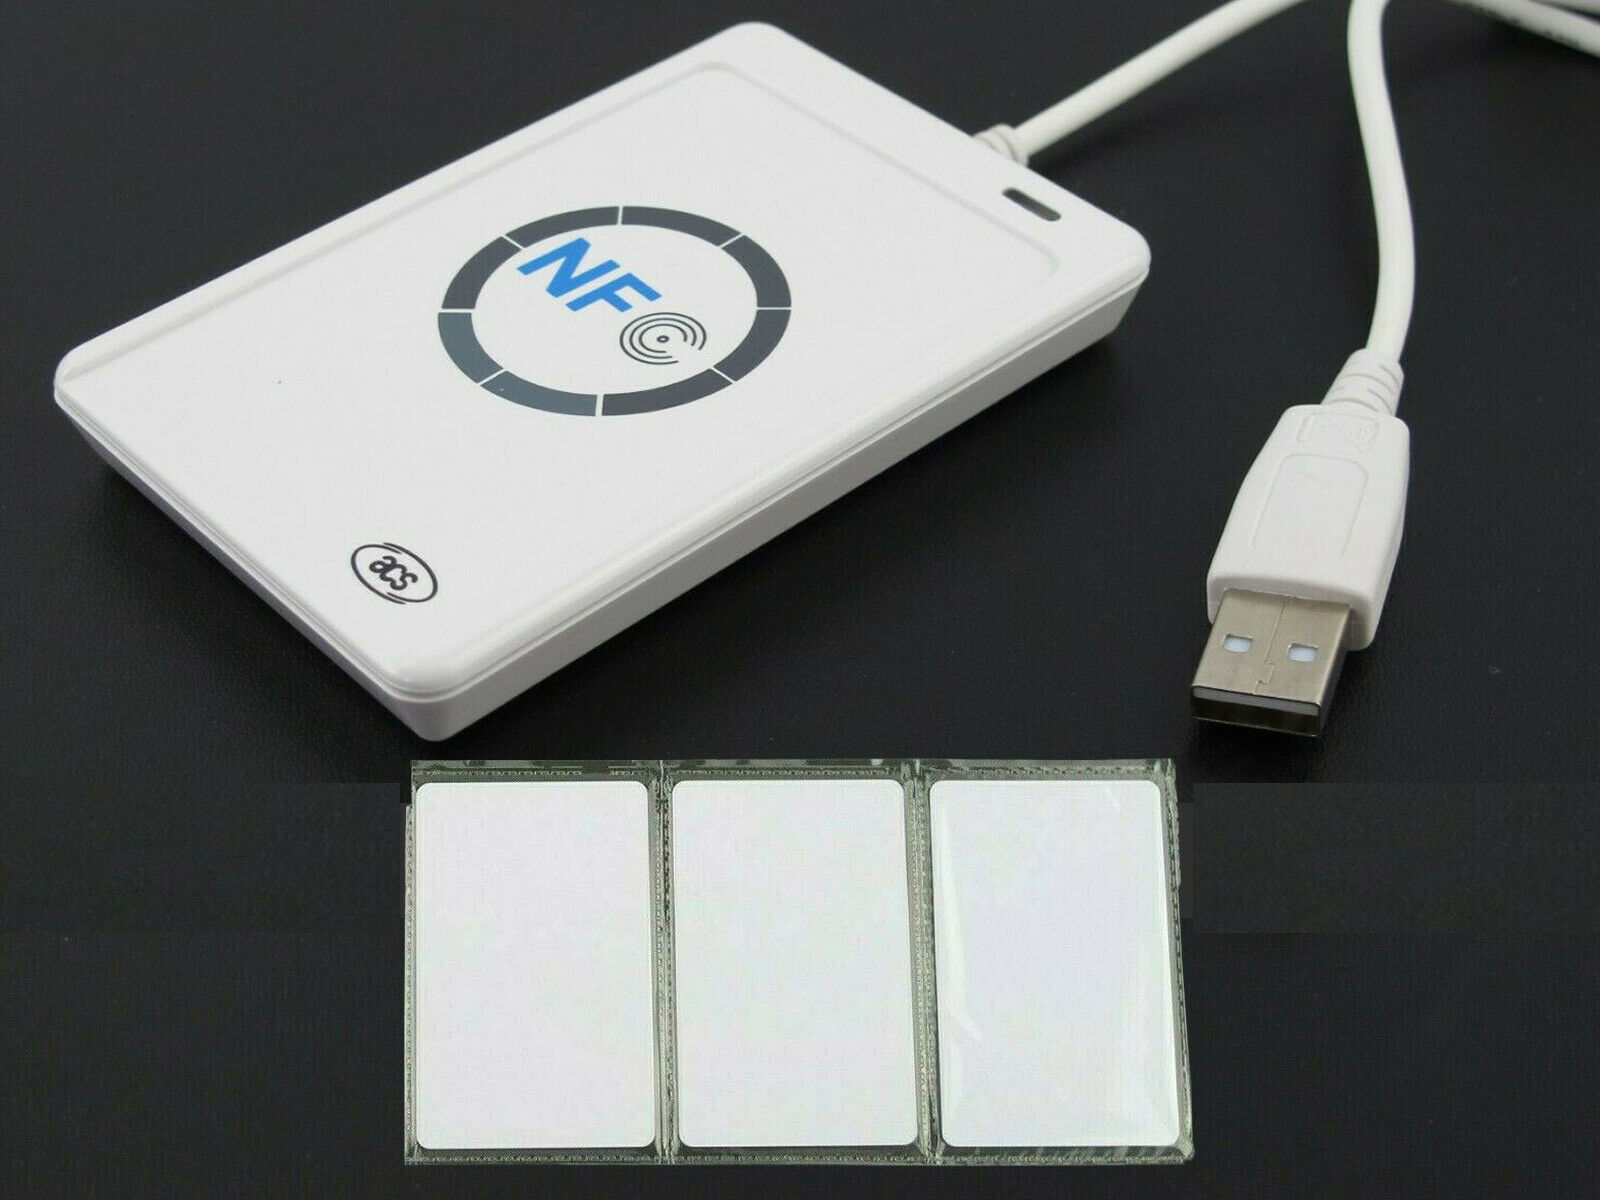 Contactless Smart Reader Writer Usb Sdk Mifare Ic Card For Nfc Acr122u Rfid